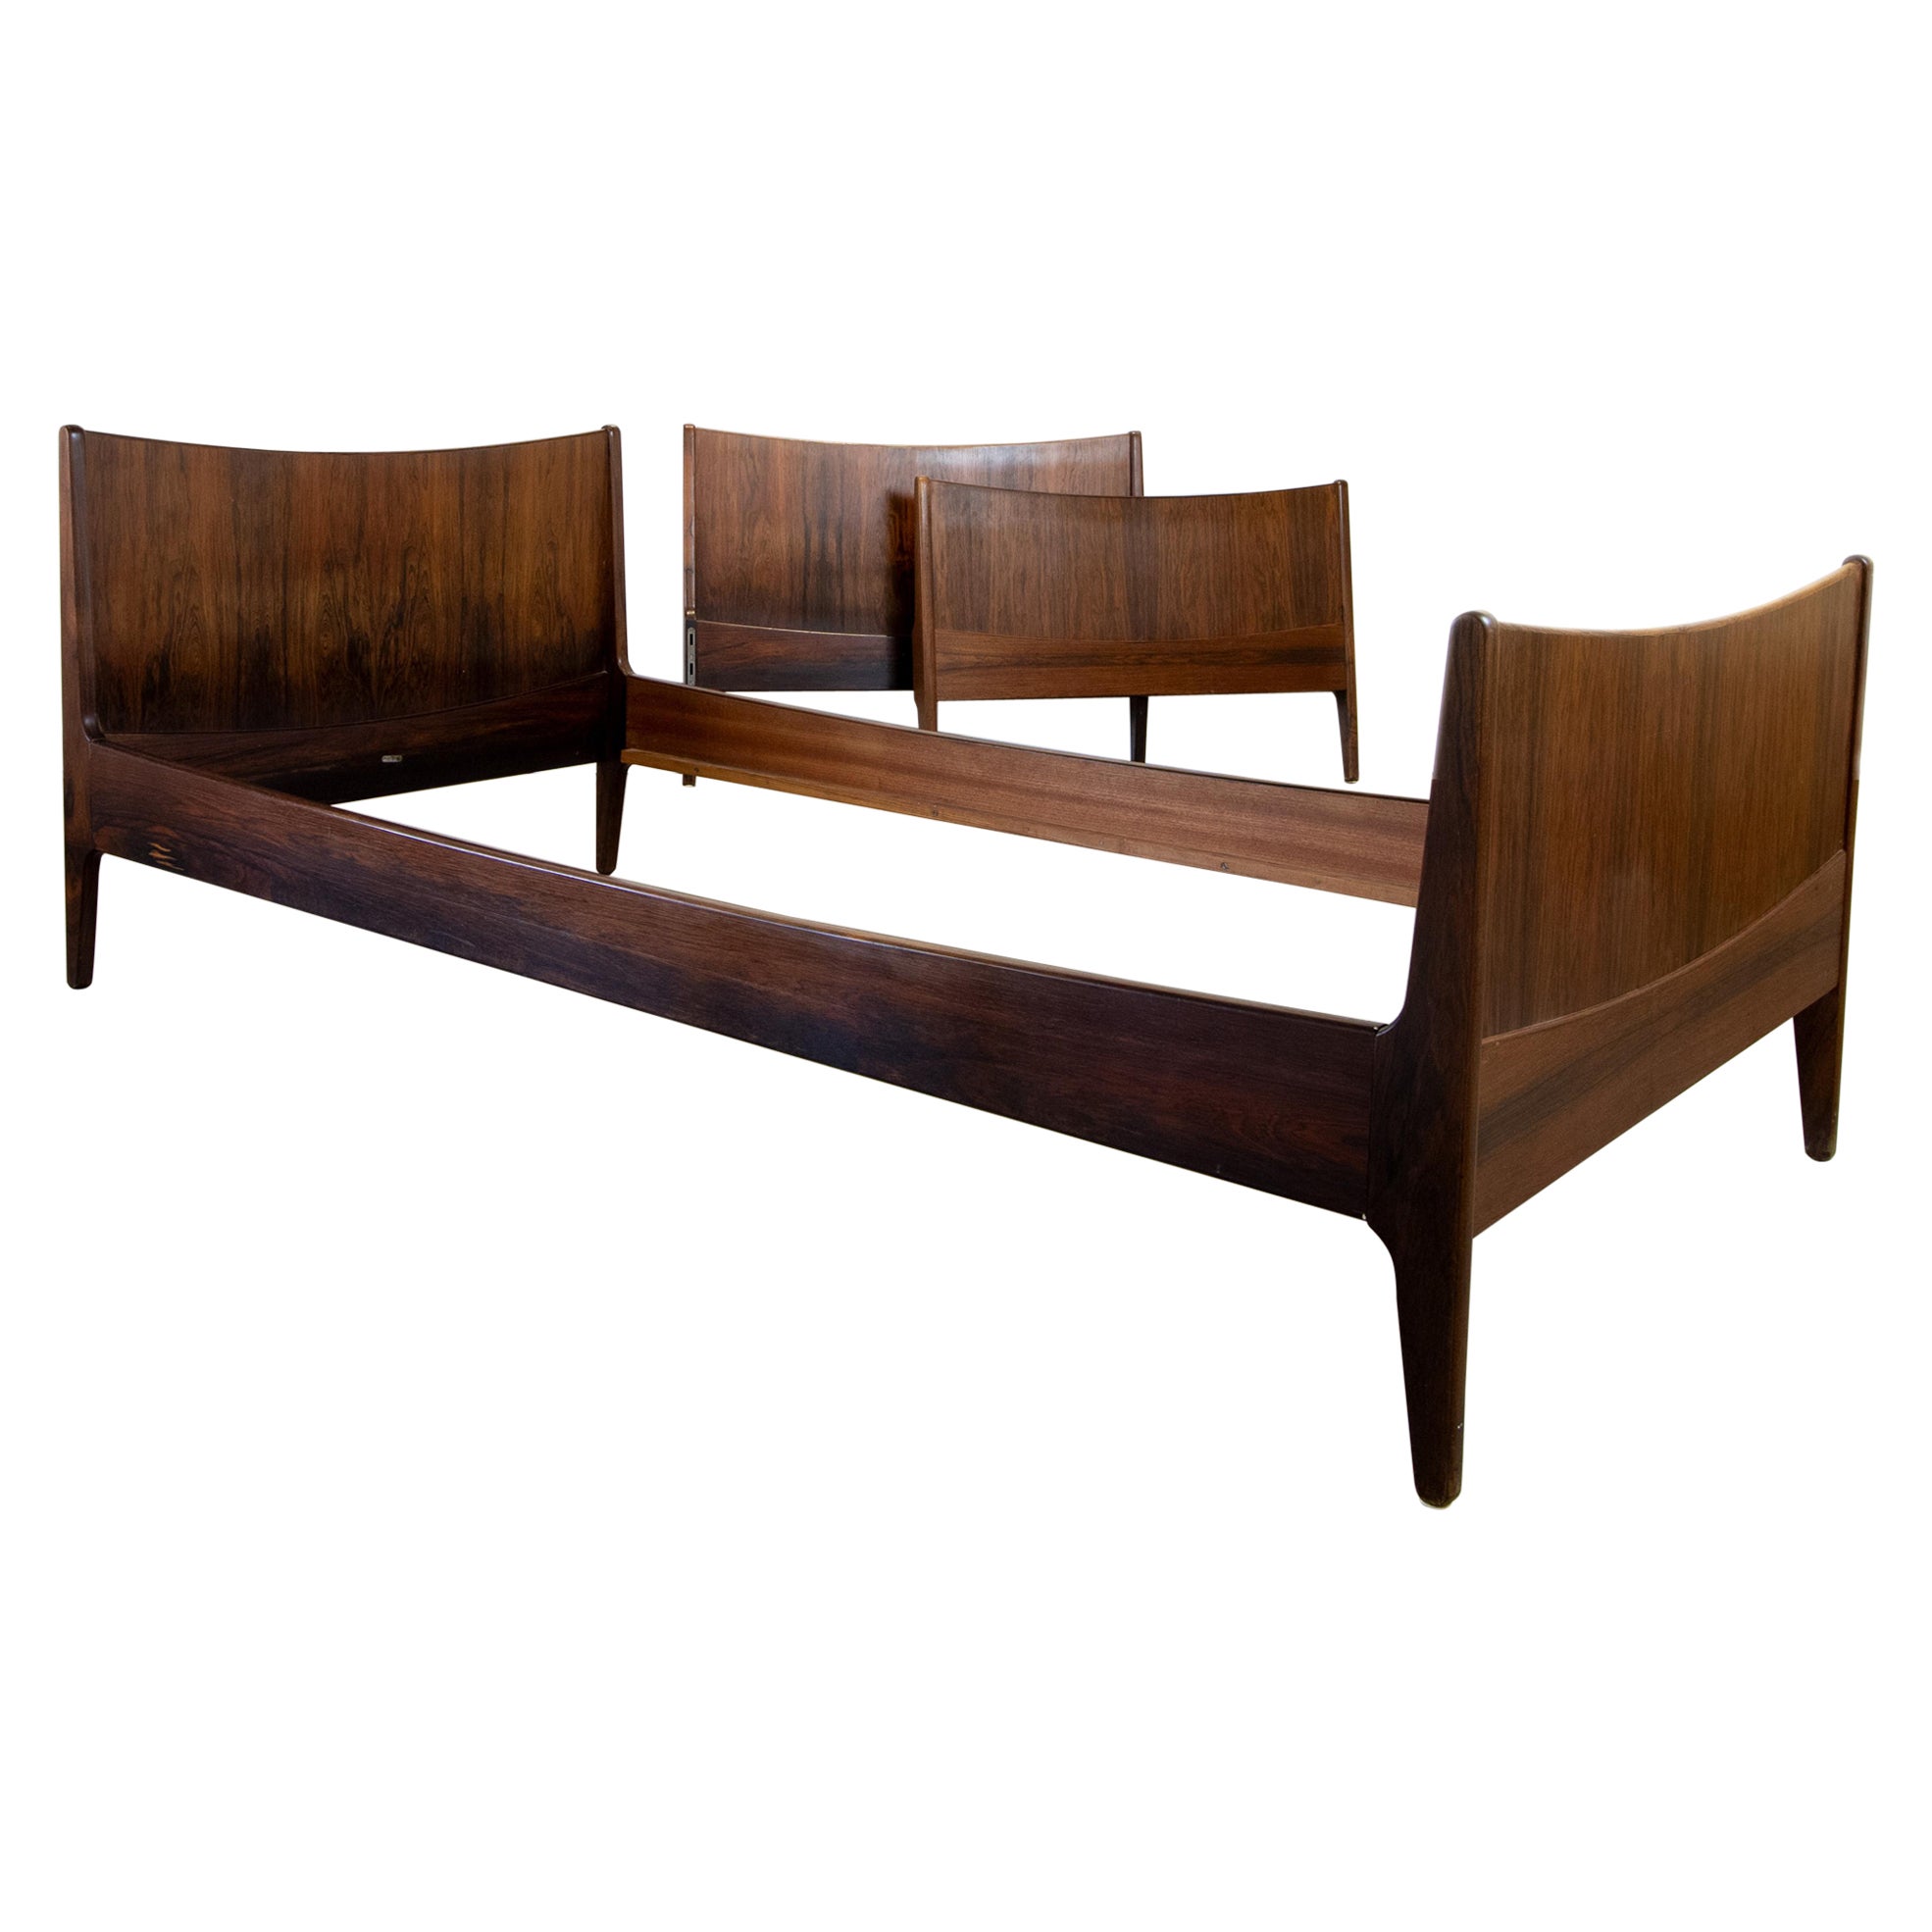 Pair of Rosewood Daybed/twin Beds designed by Harbo Solvsten by Illums Bolighus